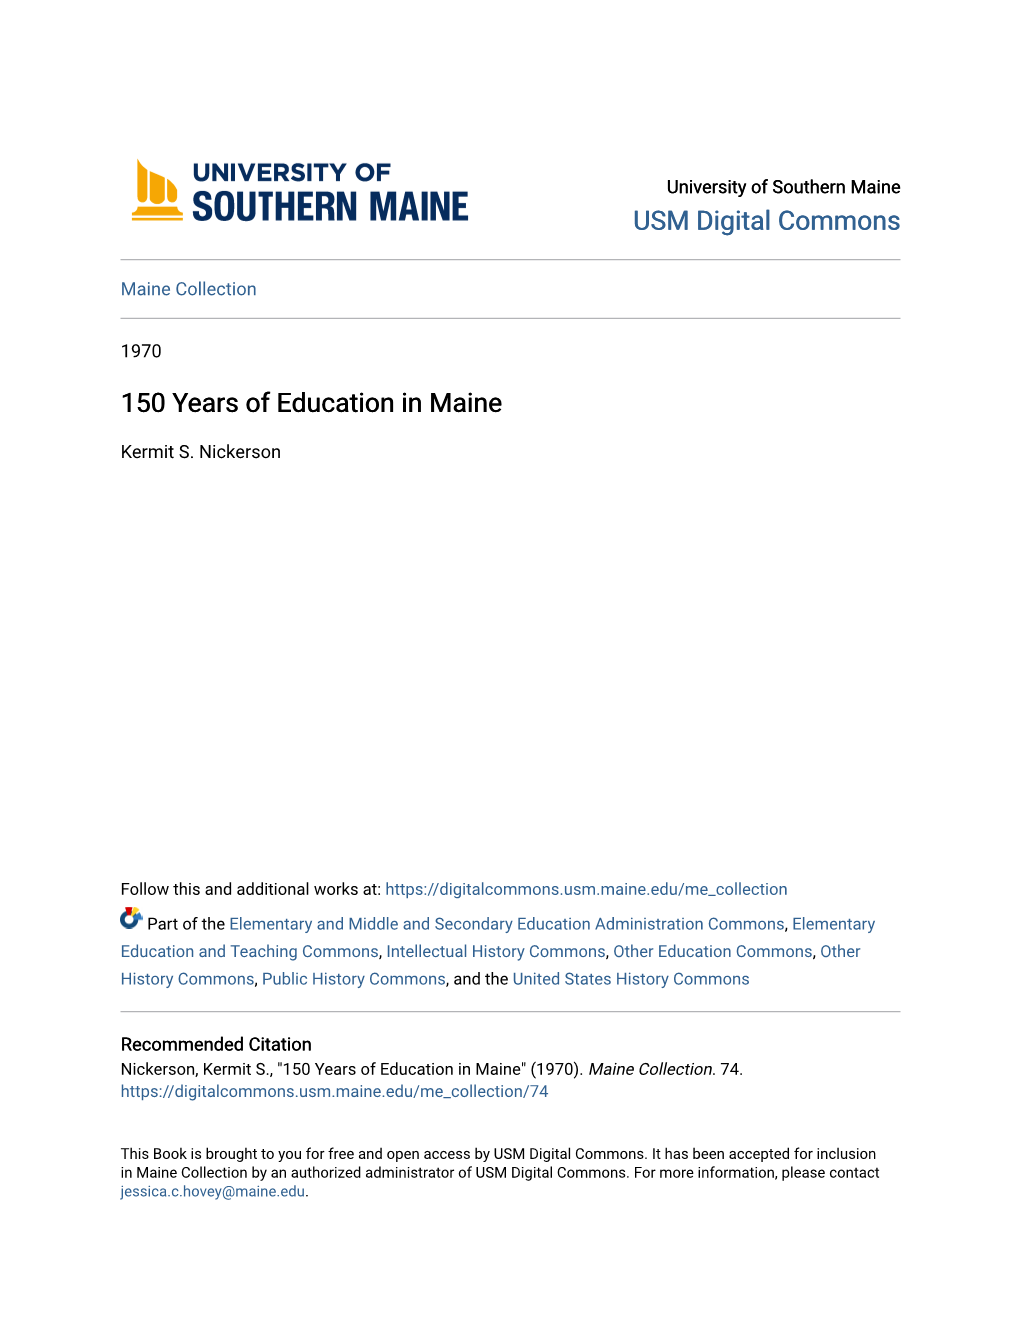 150 Years of Education in Maine